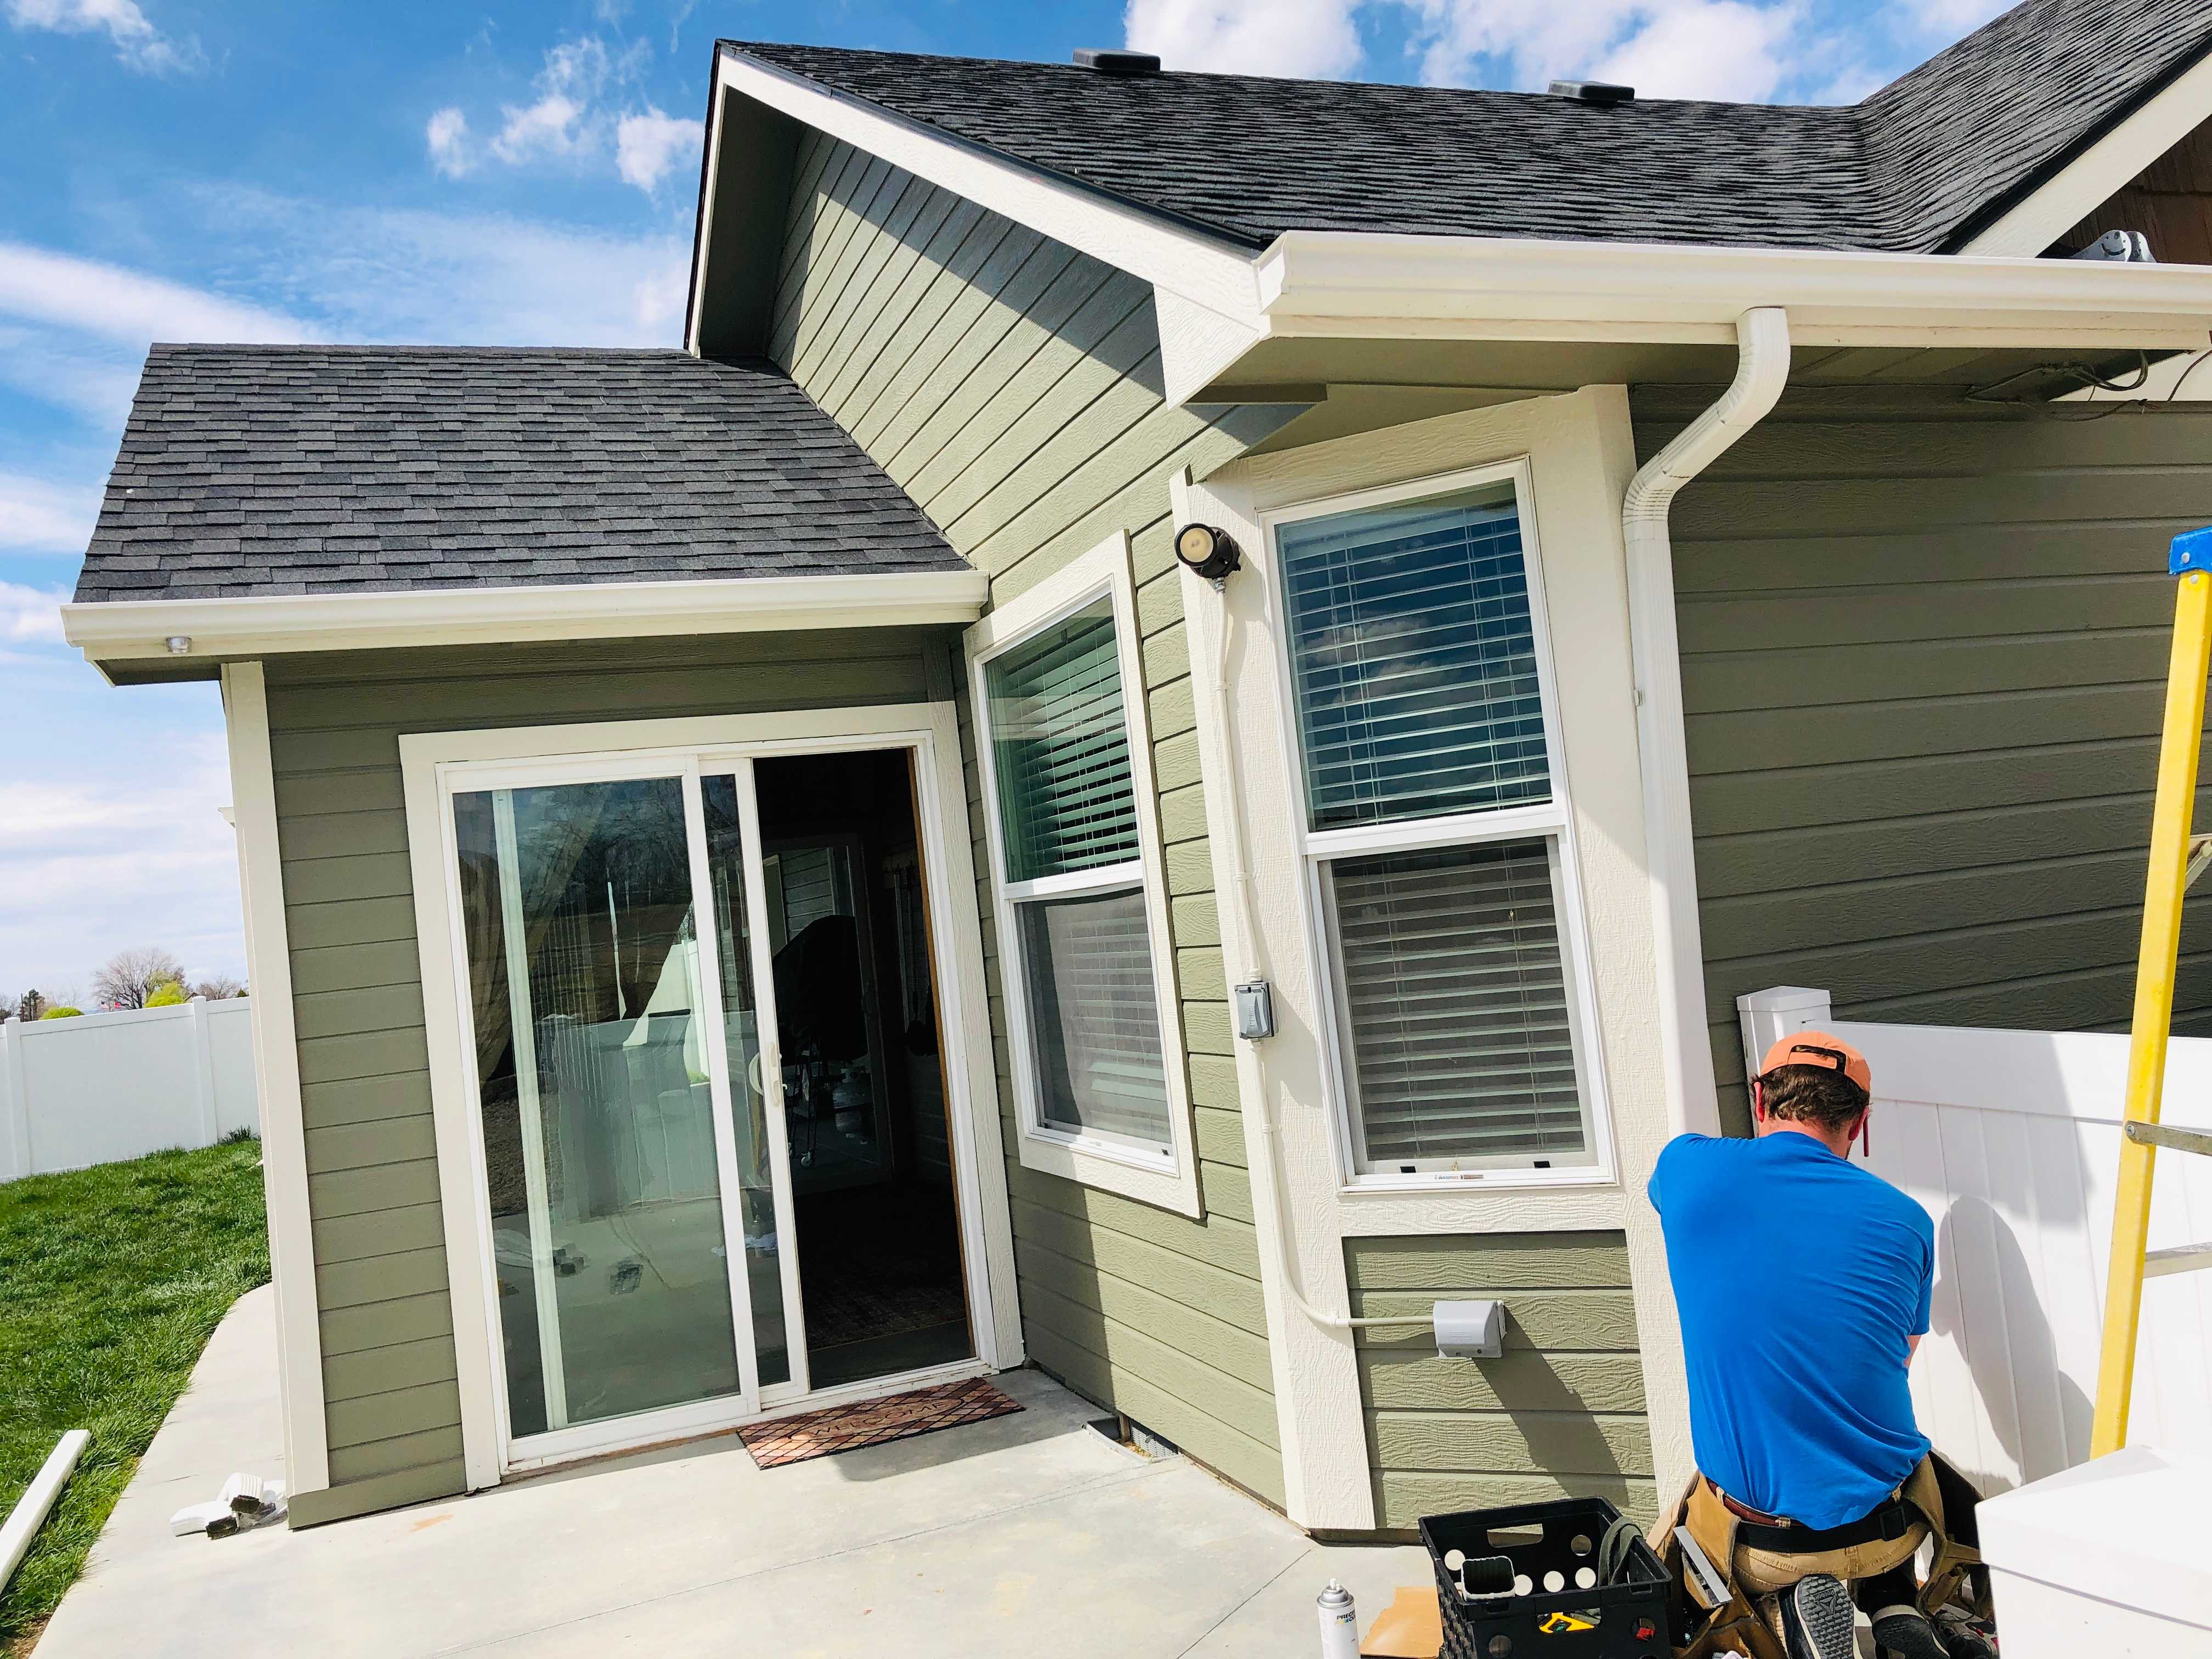 Ben Beers installing a down spout in Nampa, ID.